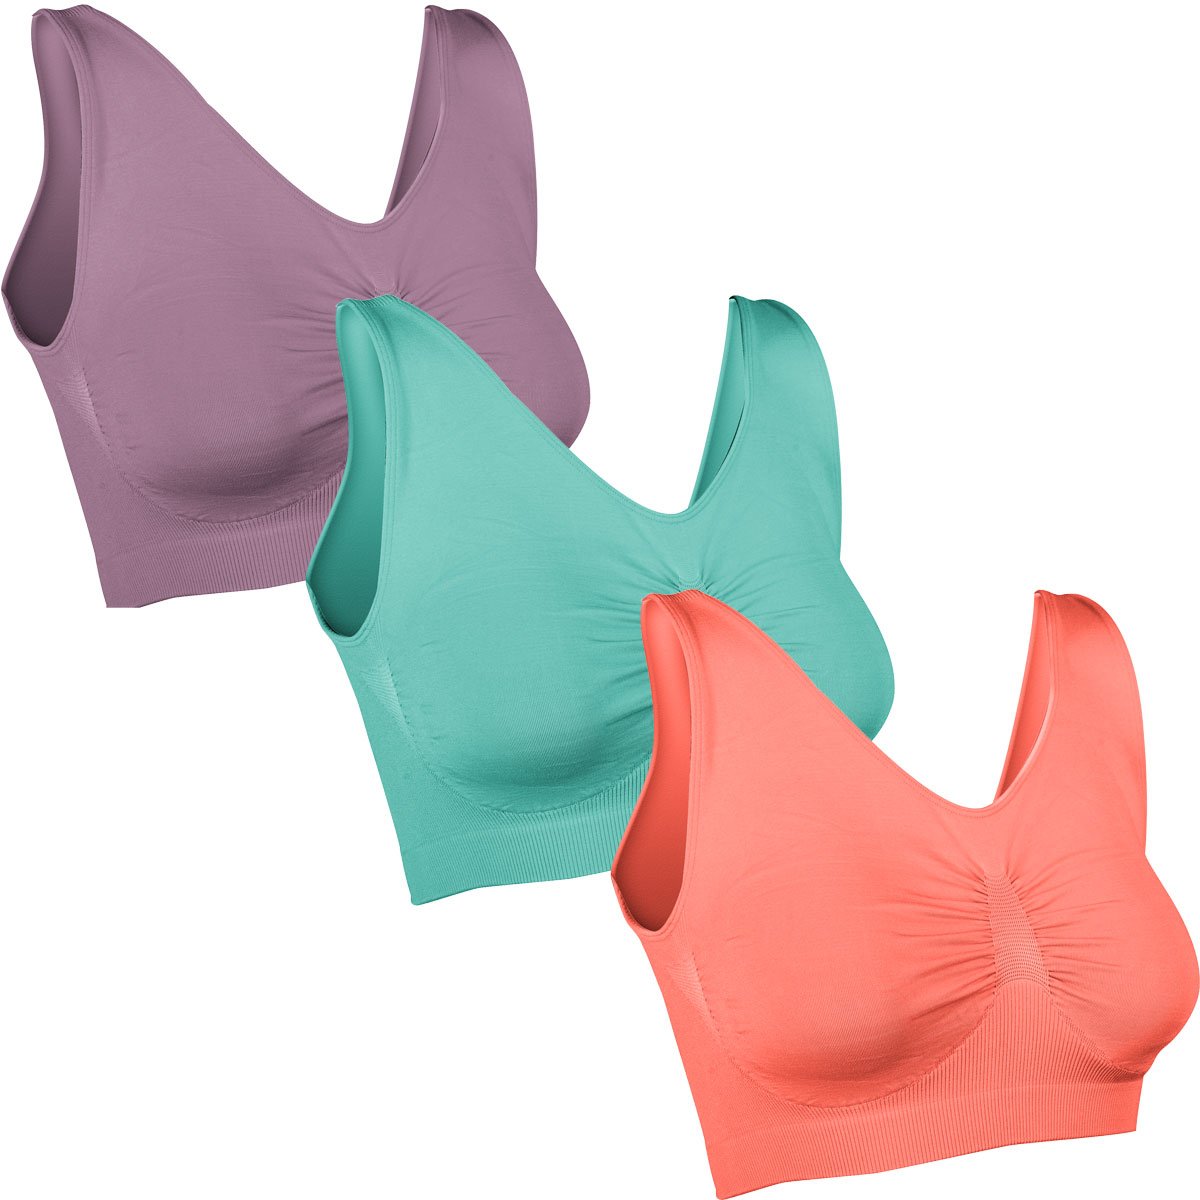 Comfortisse 3 Pack Of Bras Pink Purple And Teal Size Small